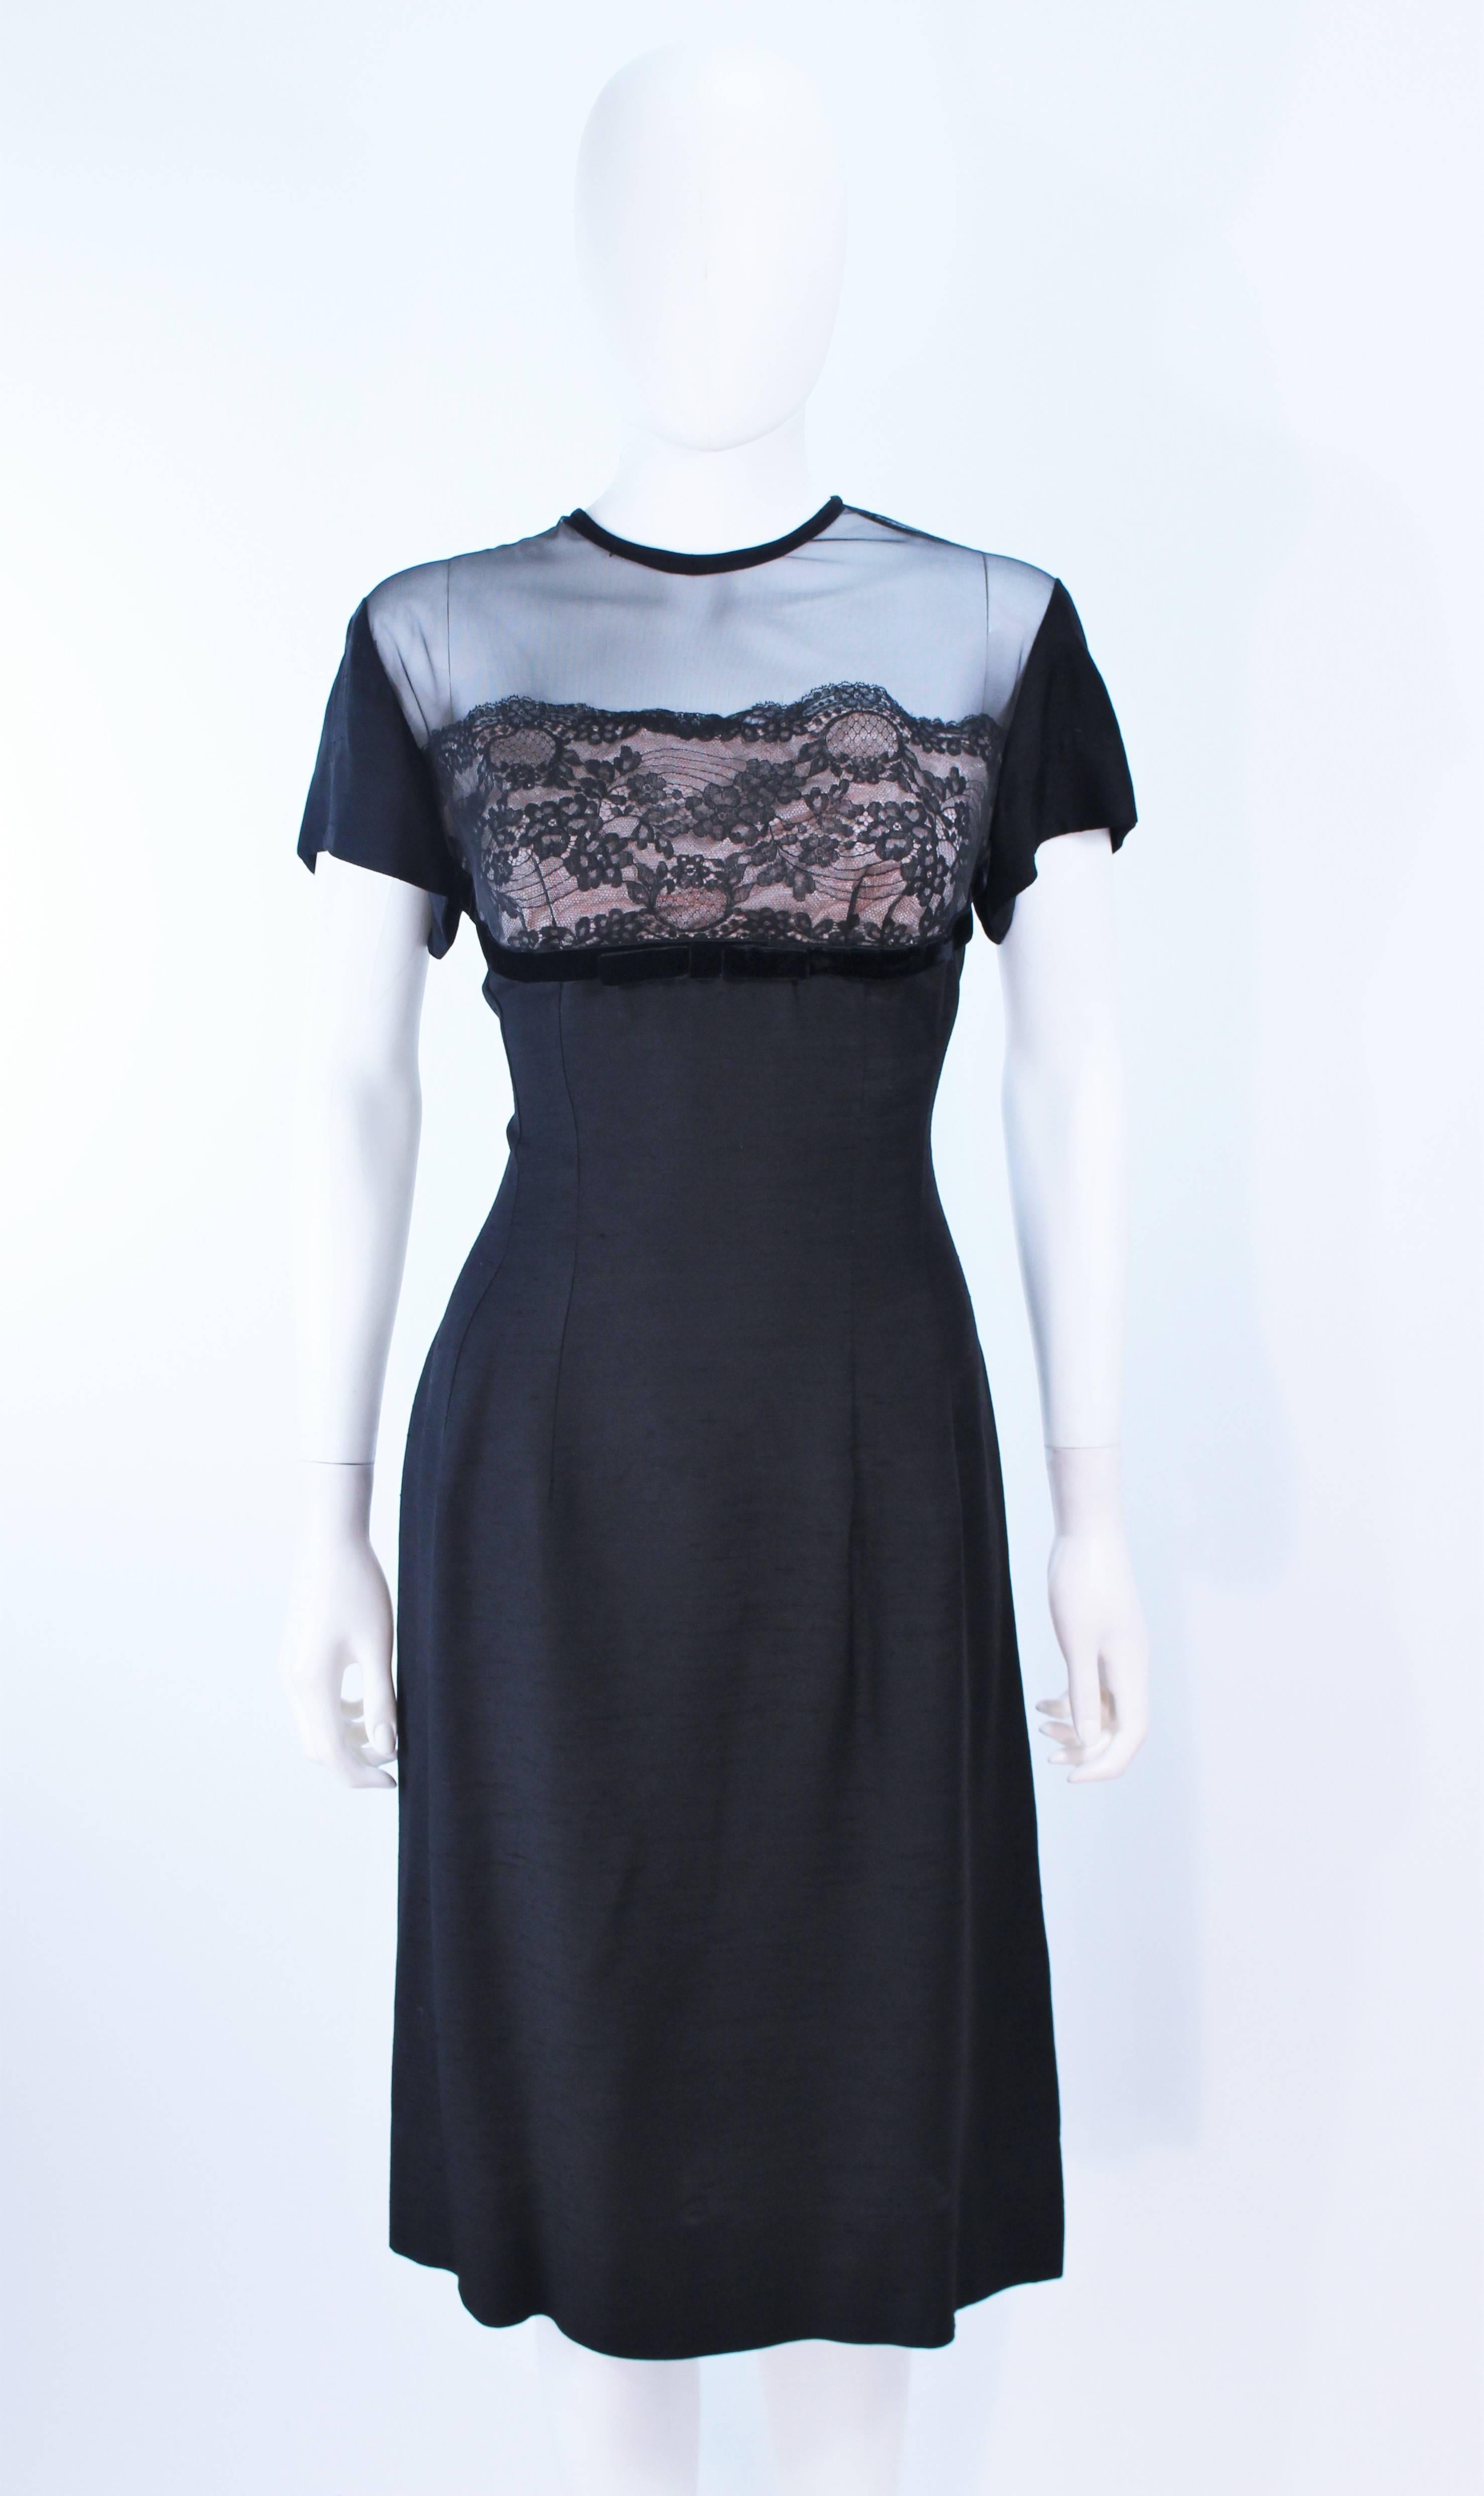 J. HARLAN Black Silk and Lace Cocktail Dress with Sheer Details Size 8 In Excellent Condition For Sale In Los Angeles, CA